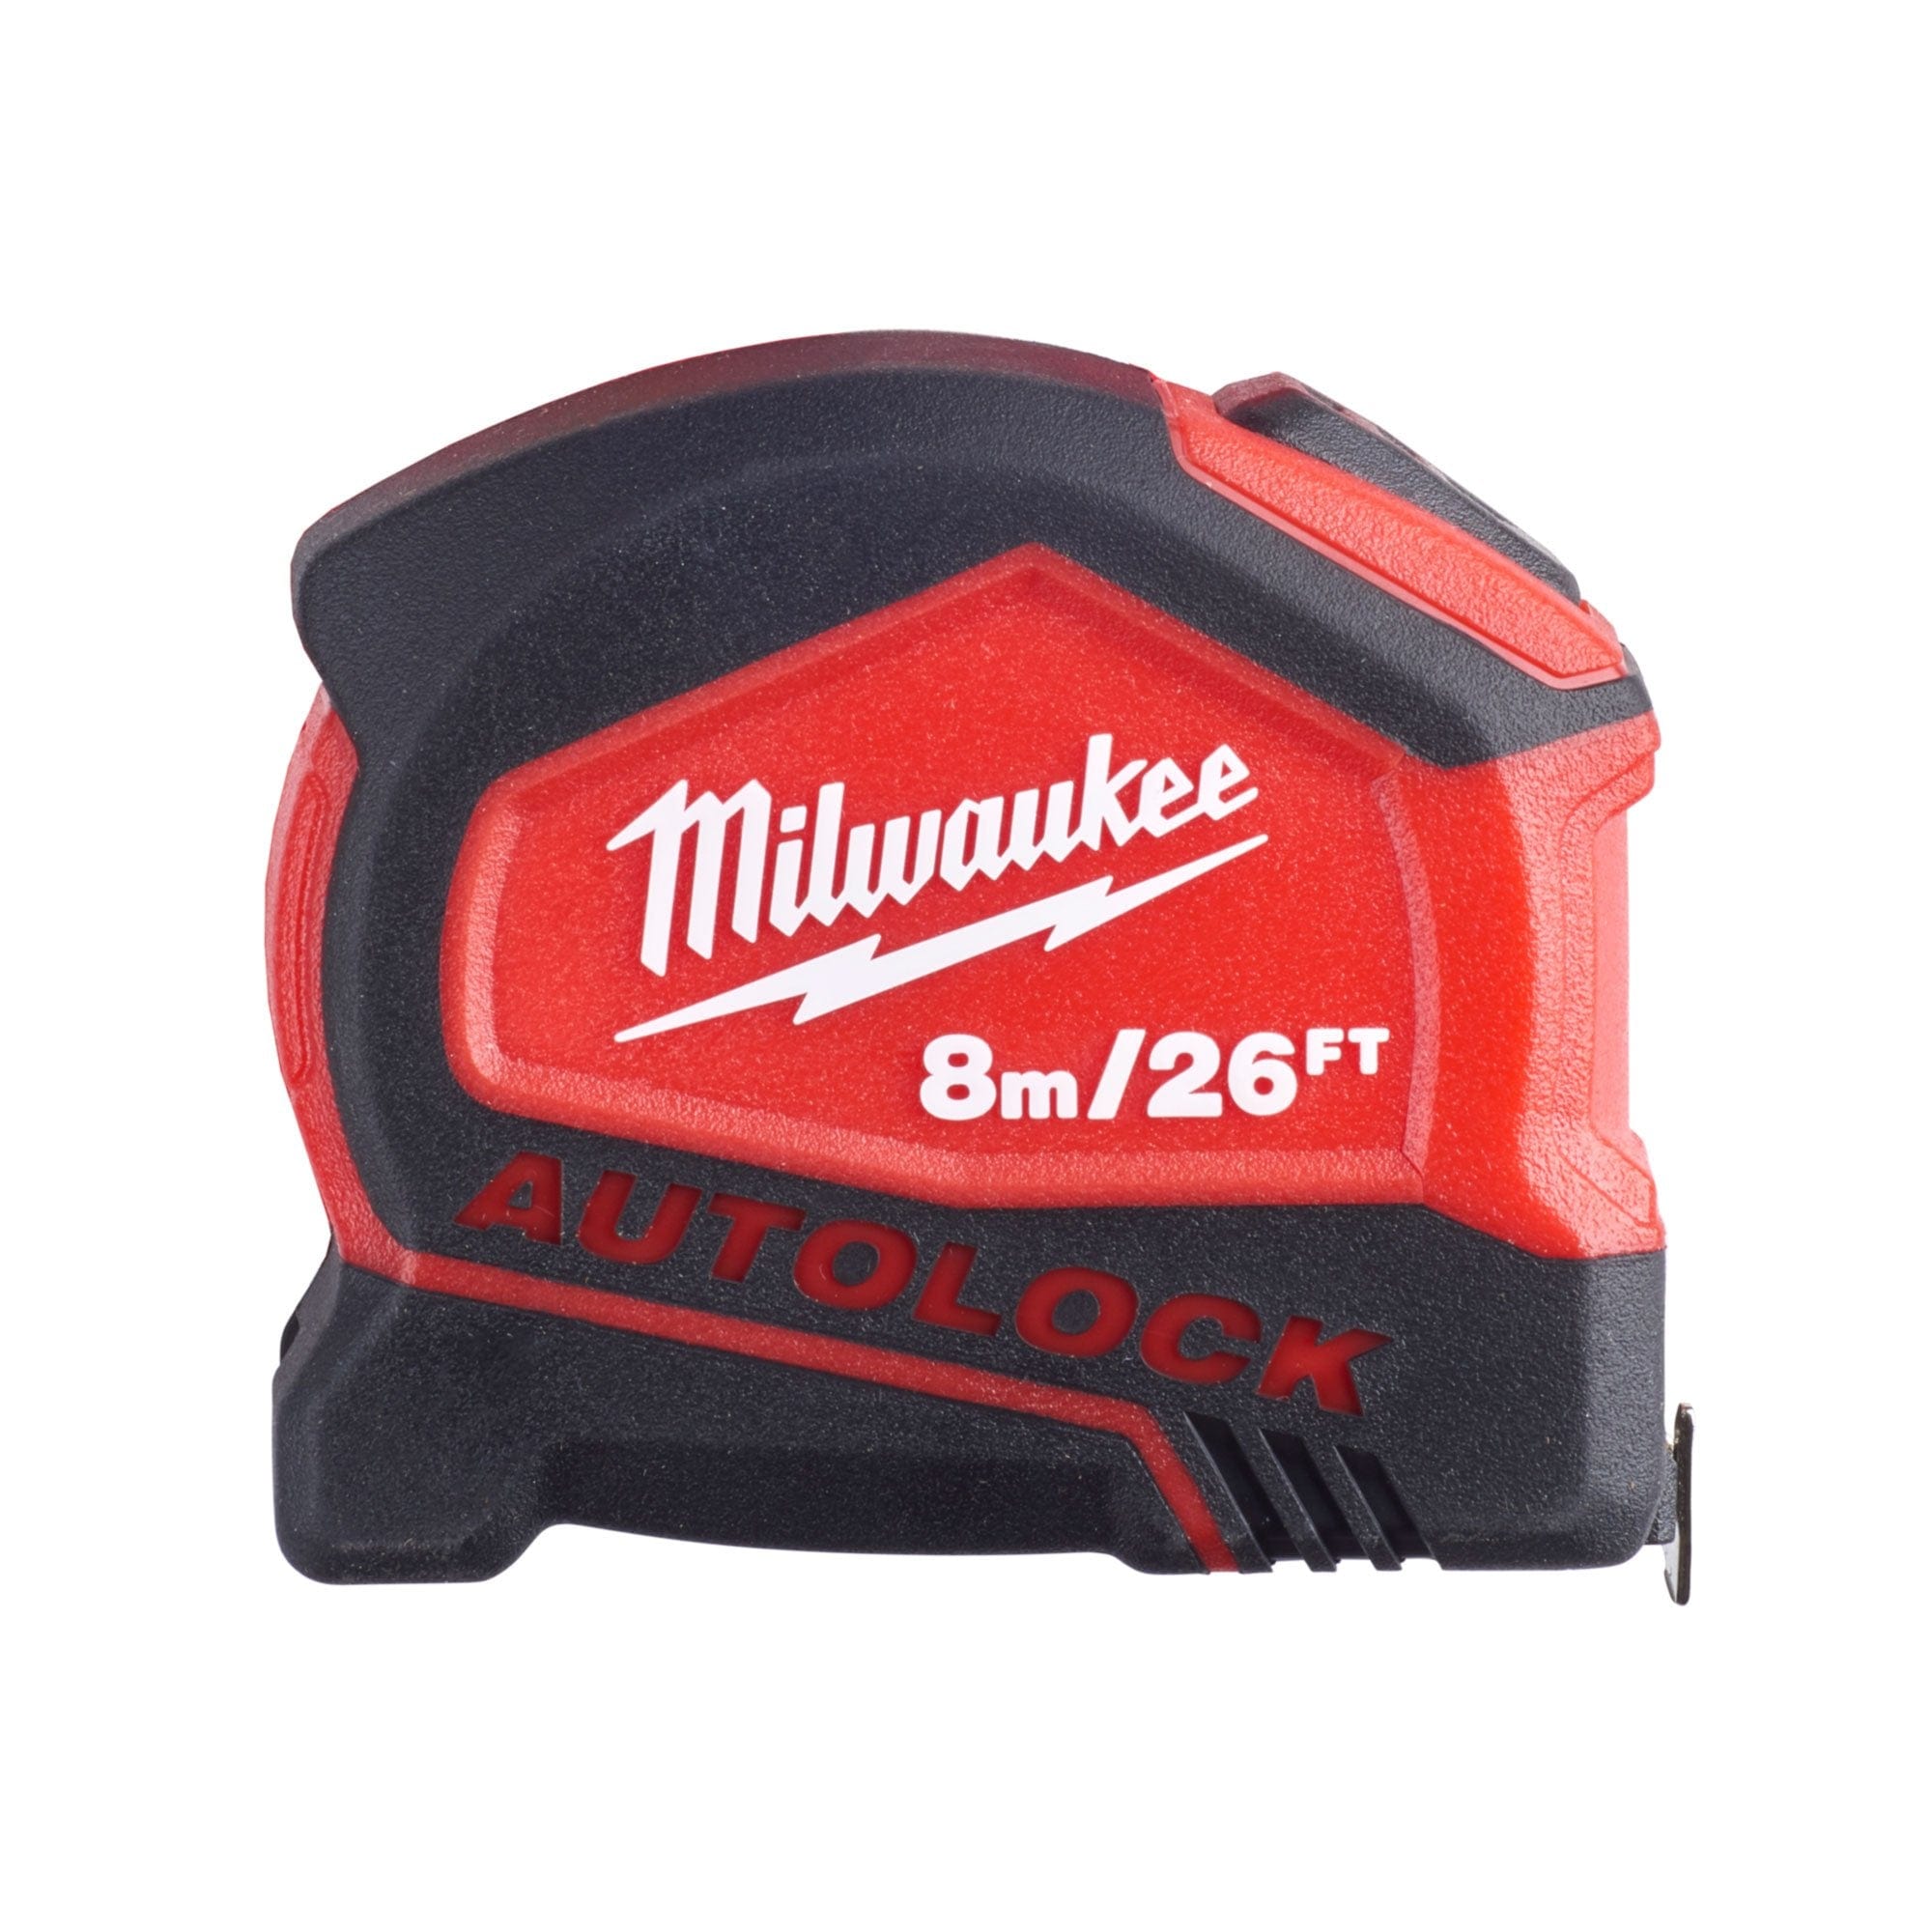 Milwaukee Measuring Tape With Auto Lock 8m/26ft - 4932464666 | Supply Master | Accra, Ghana Tape Measure Buy Tools hardware Building materials